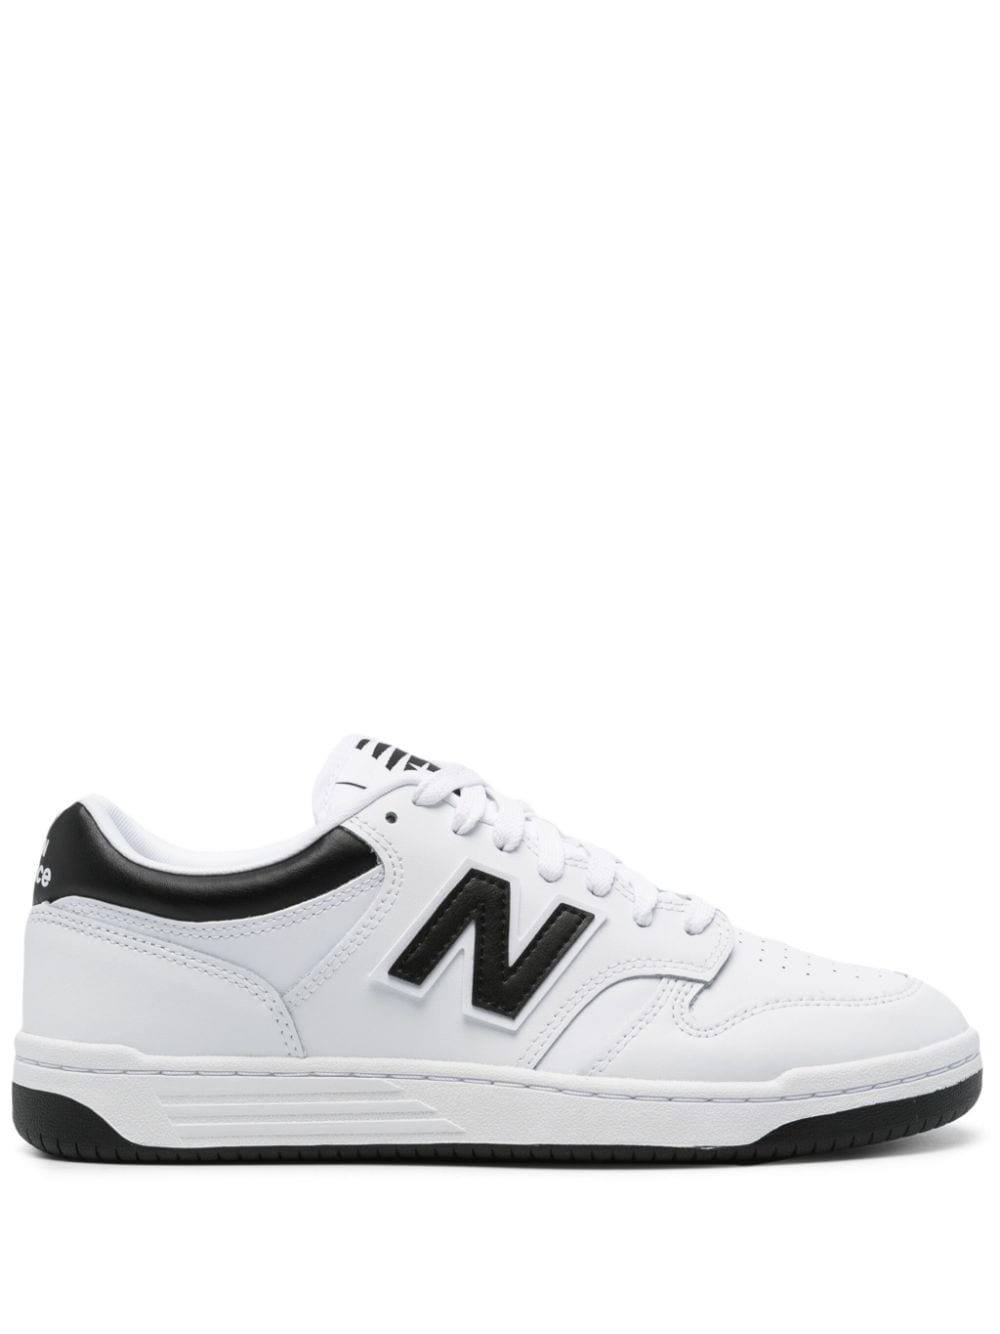 Image 1 of New Balance 480 leather sneakers